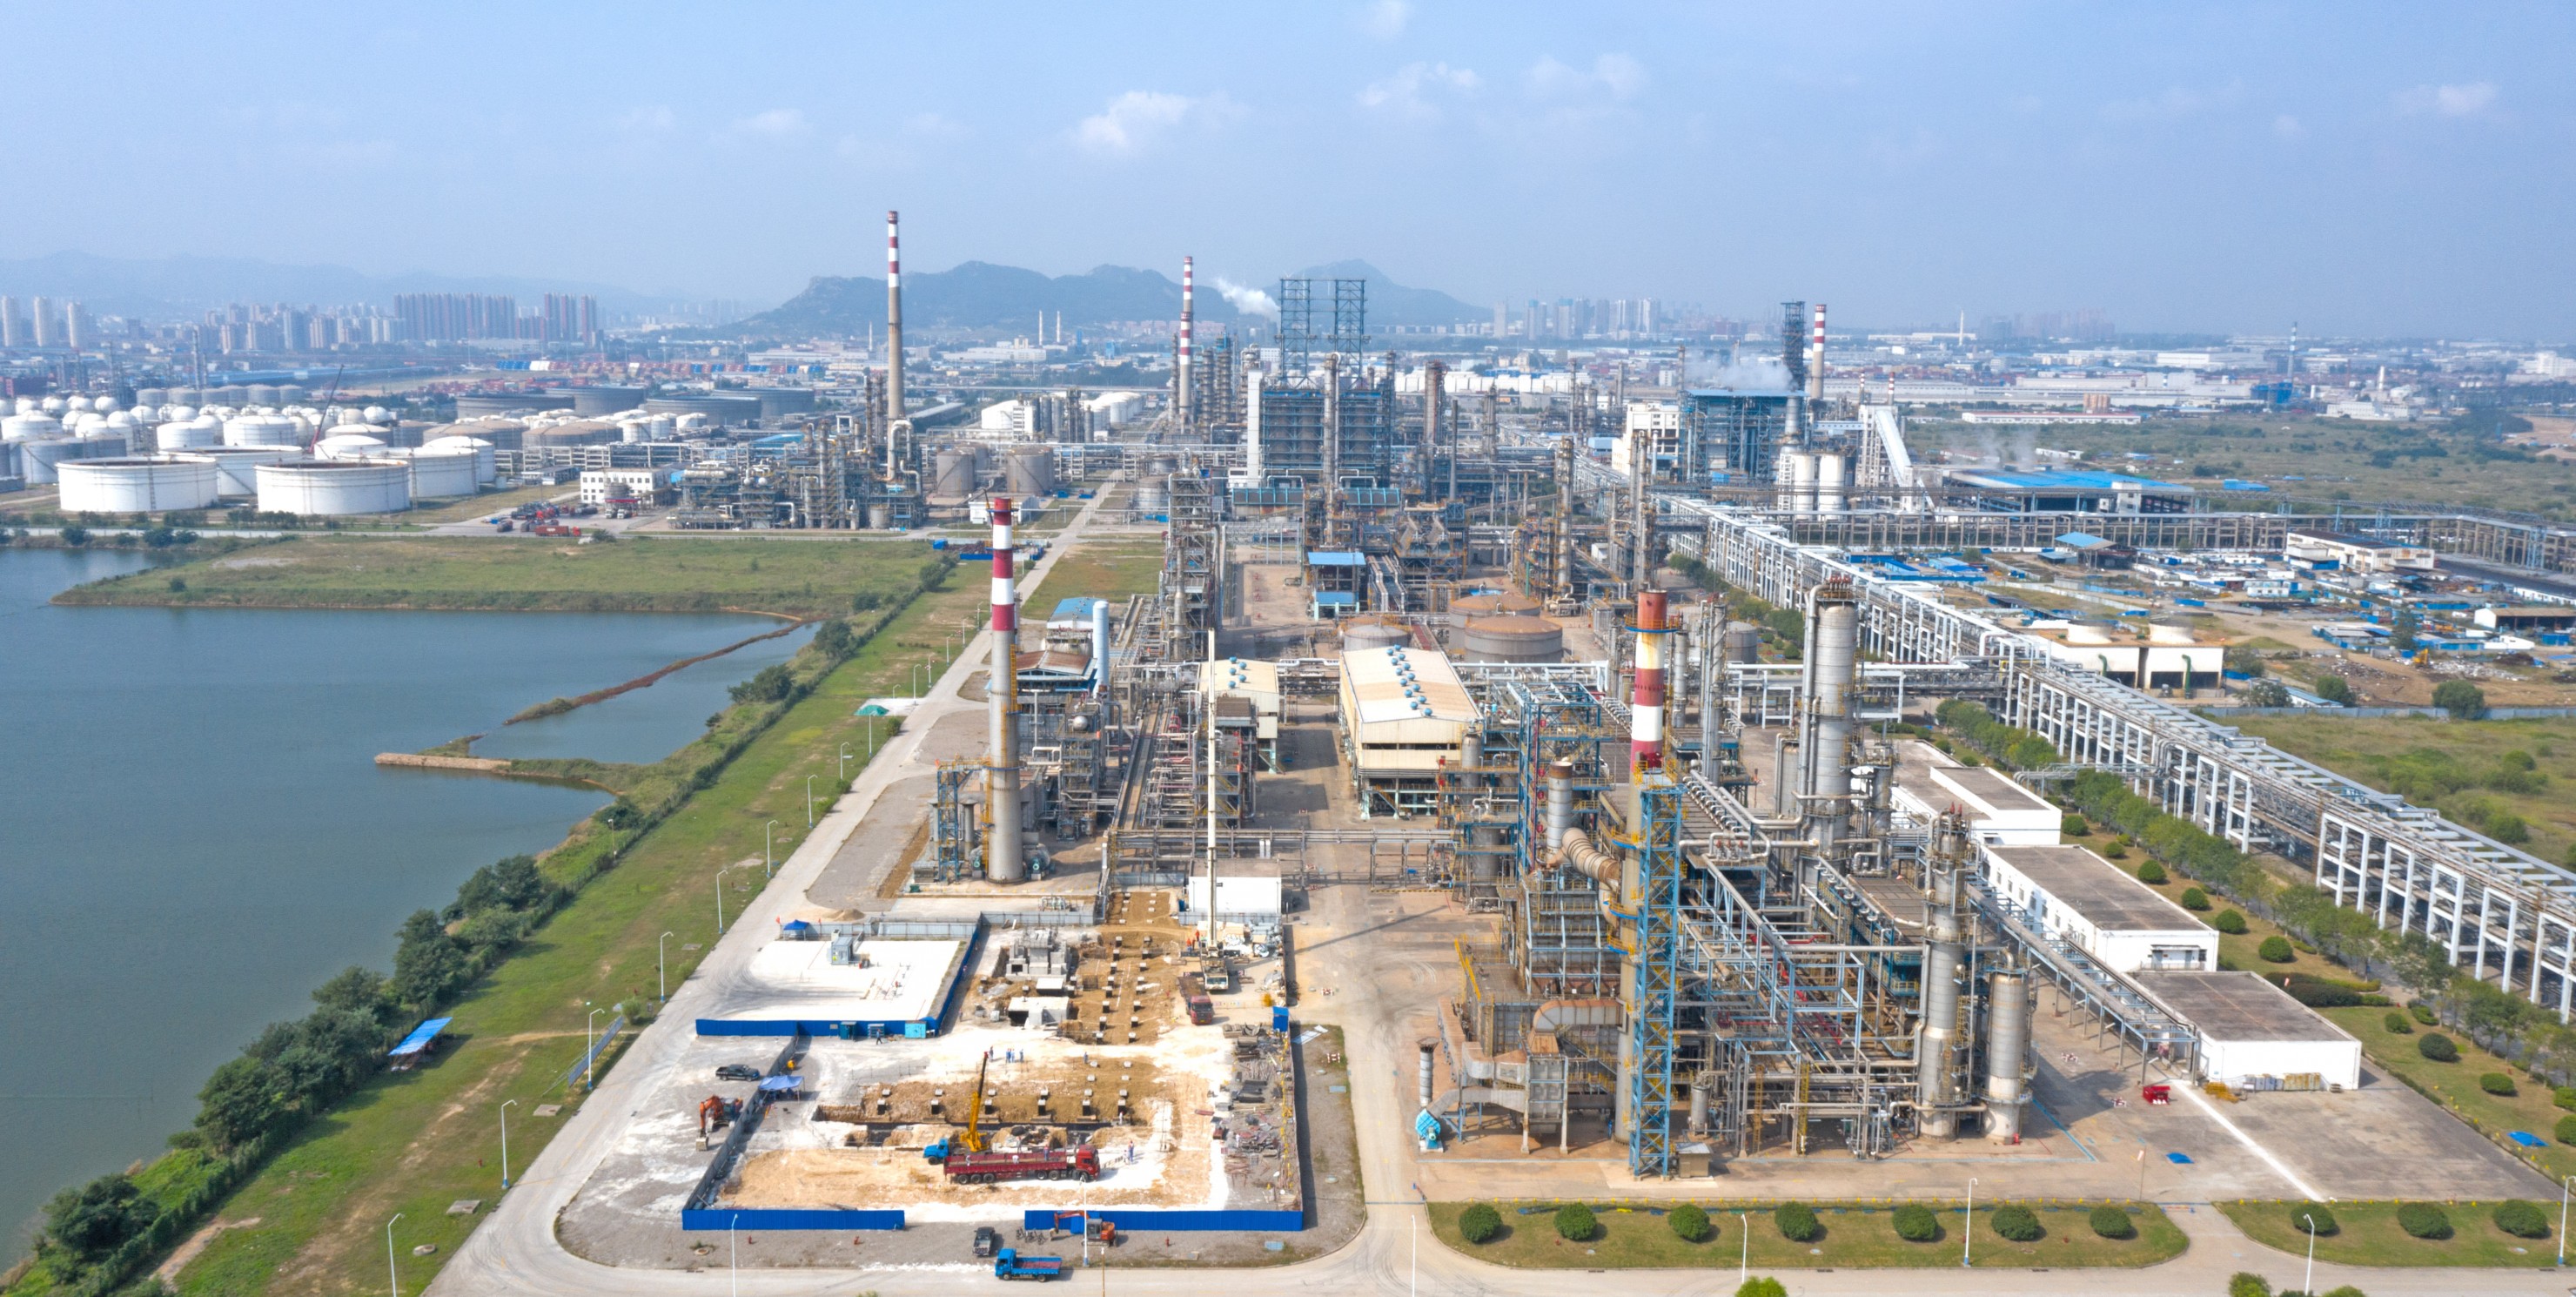 An aerial photo taken on September 17, 2021 shows the construction site of Qingdao Refinery and Chemical Hydrogen Energy Base project in Qingdao, Shandong Province, China. 